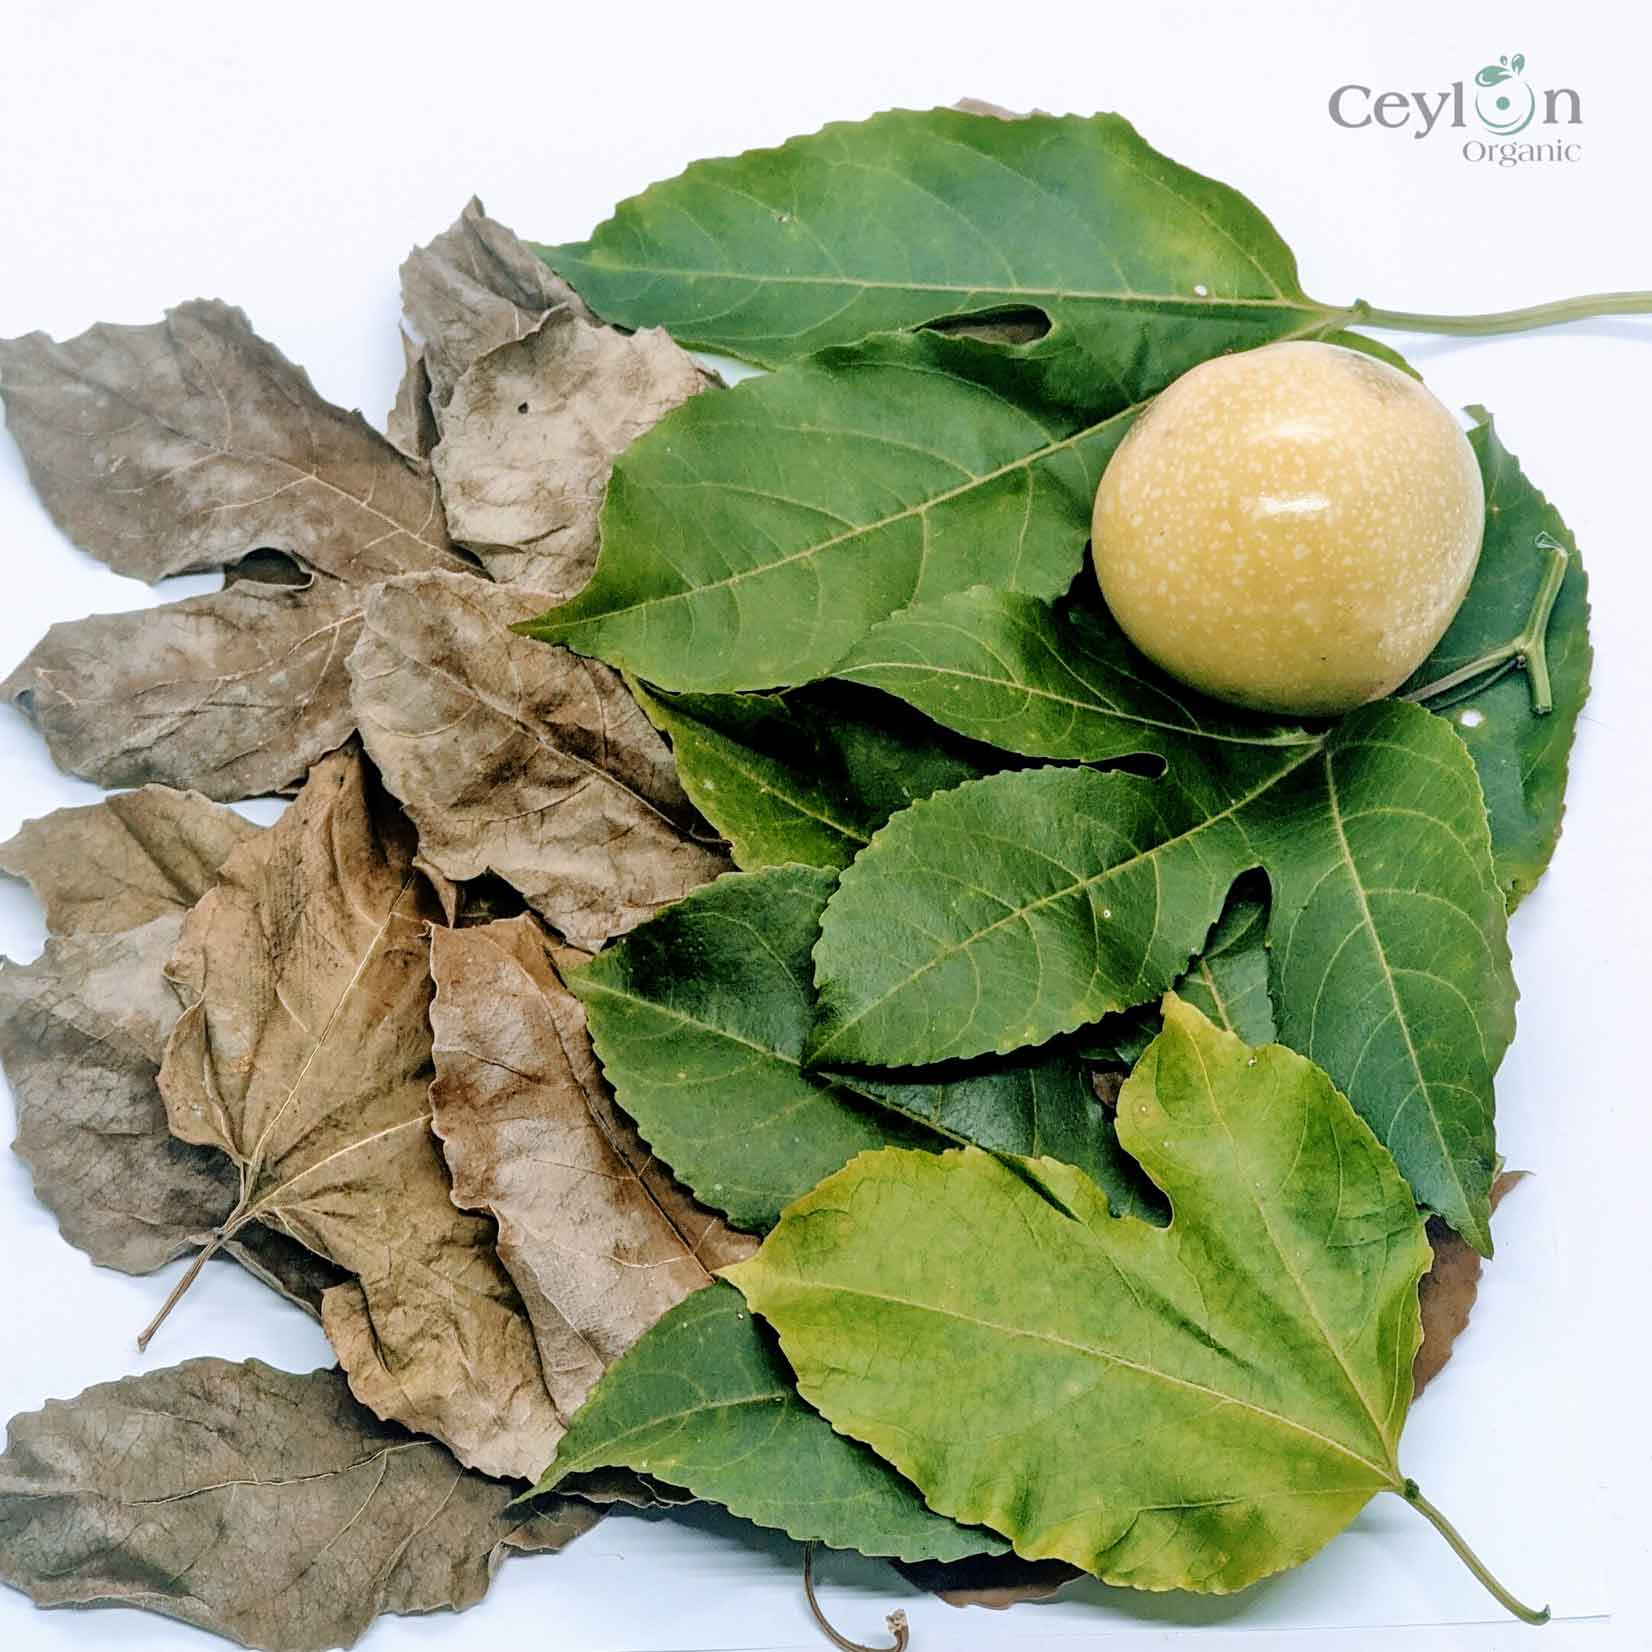 500+ Passion Fruit,Dried Passion Fruit Leaves,Dried Natural Passion Fruit Leaves | Ceylon organic-1